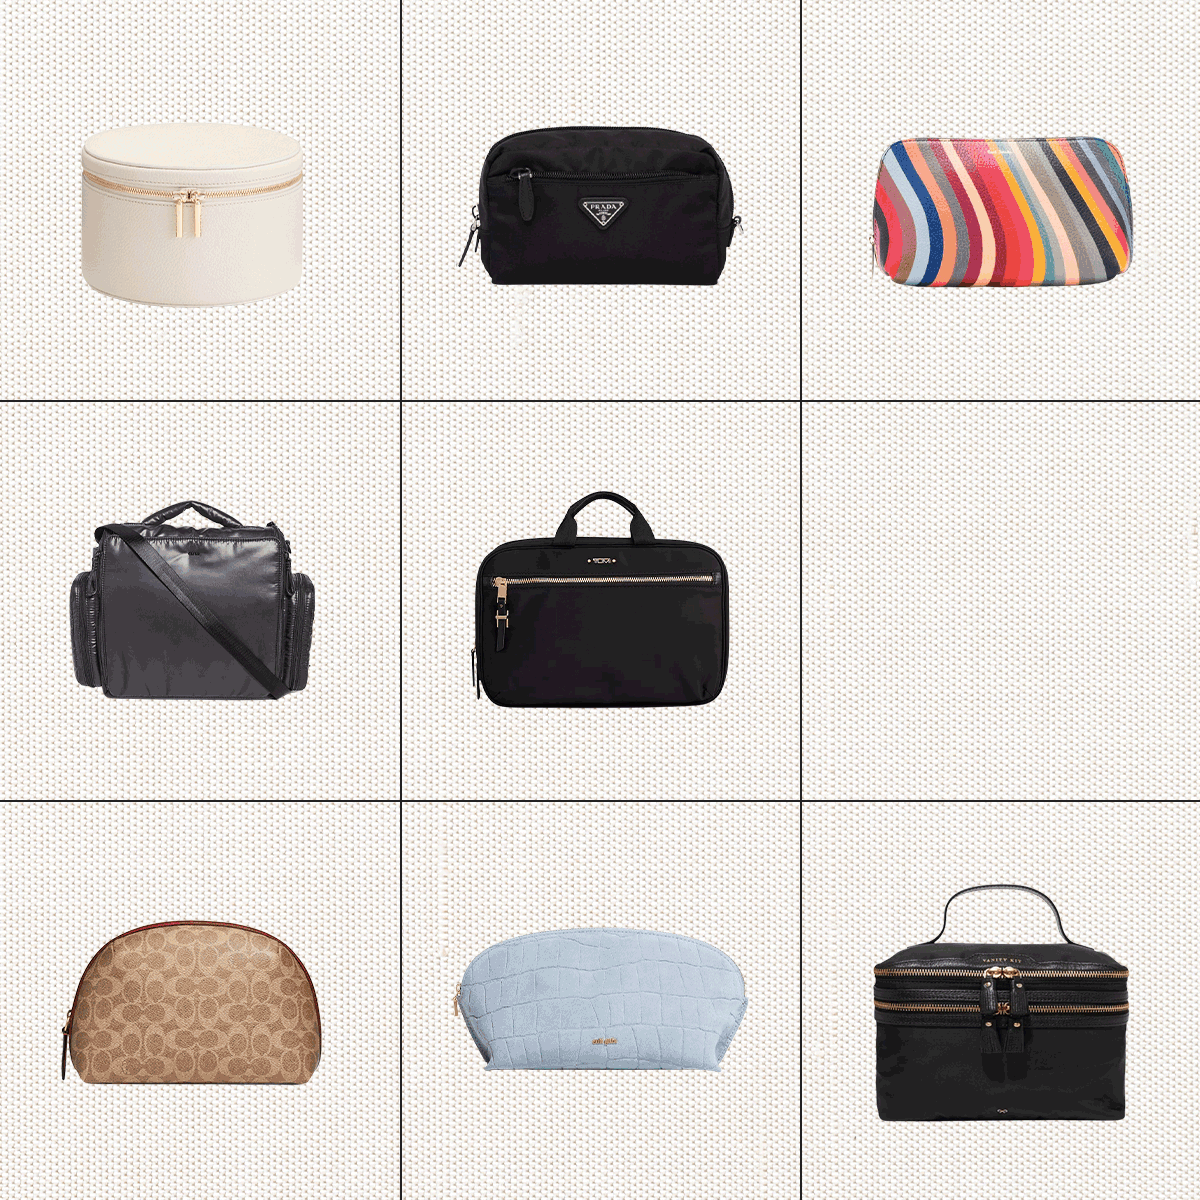 20 Designer Makeup Bags (Because Your Products Deserve the Best)